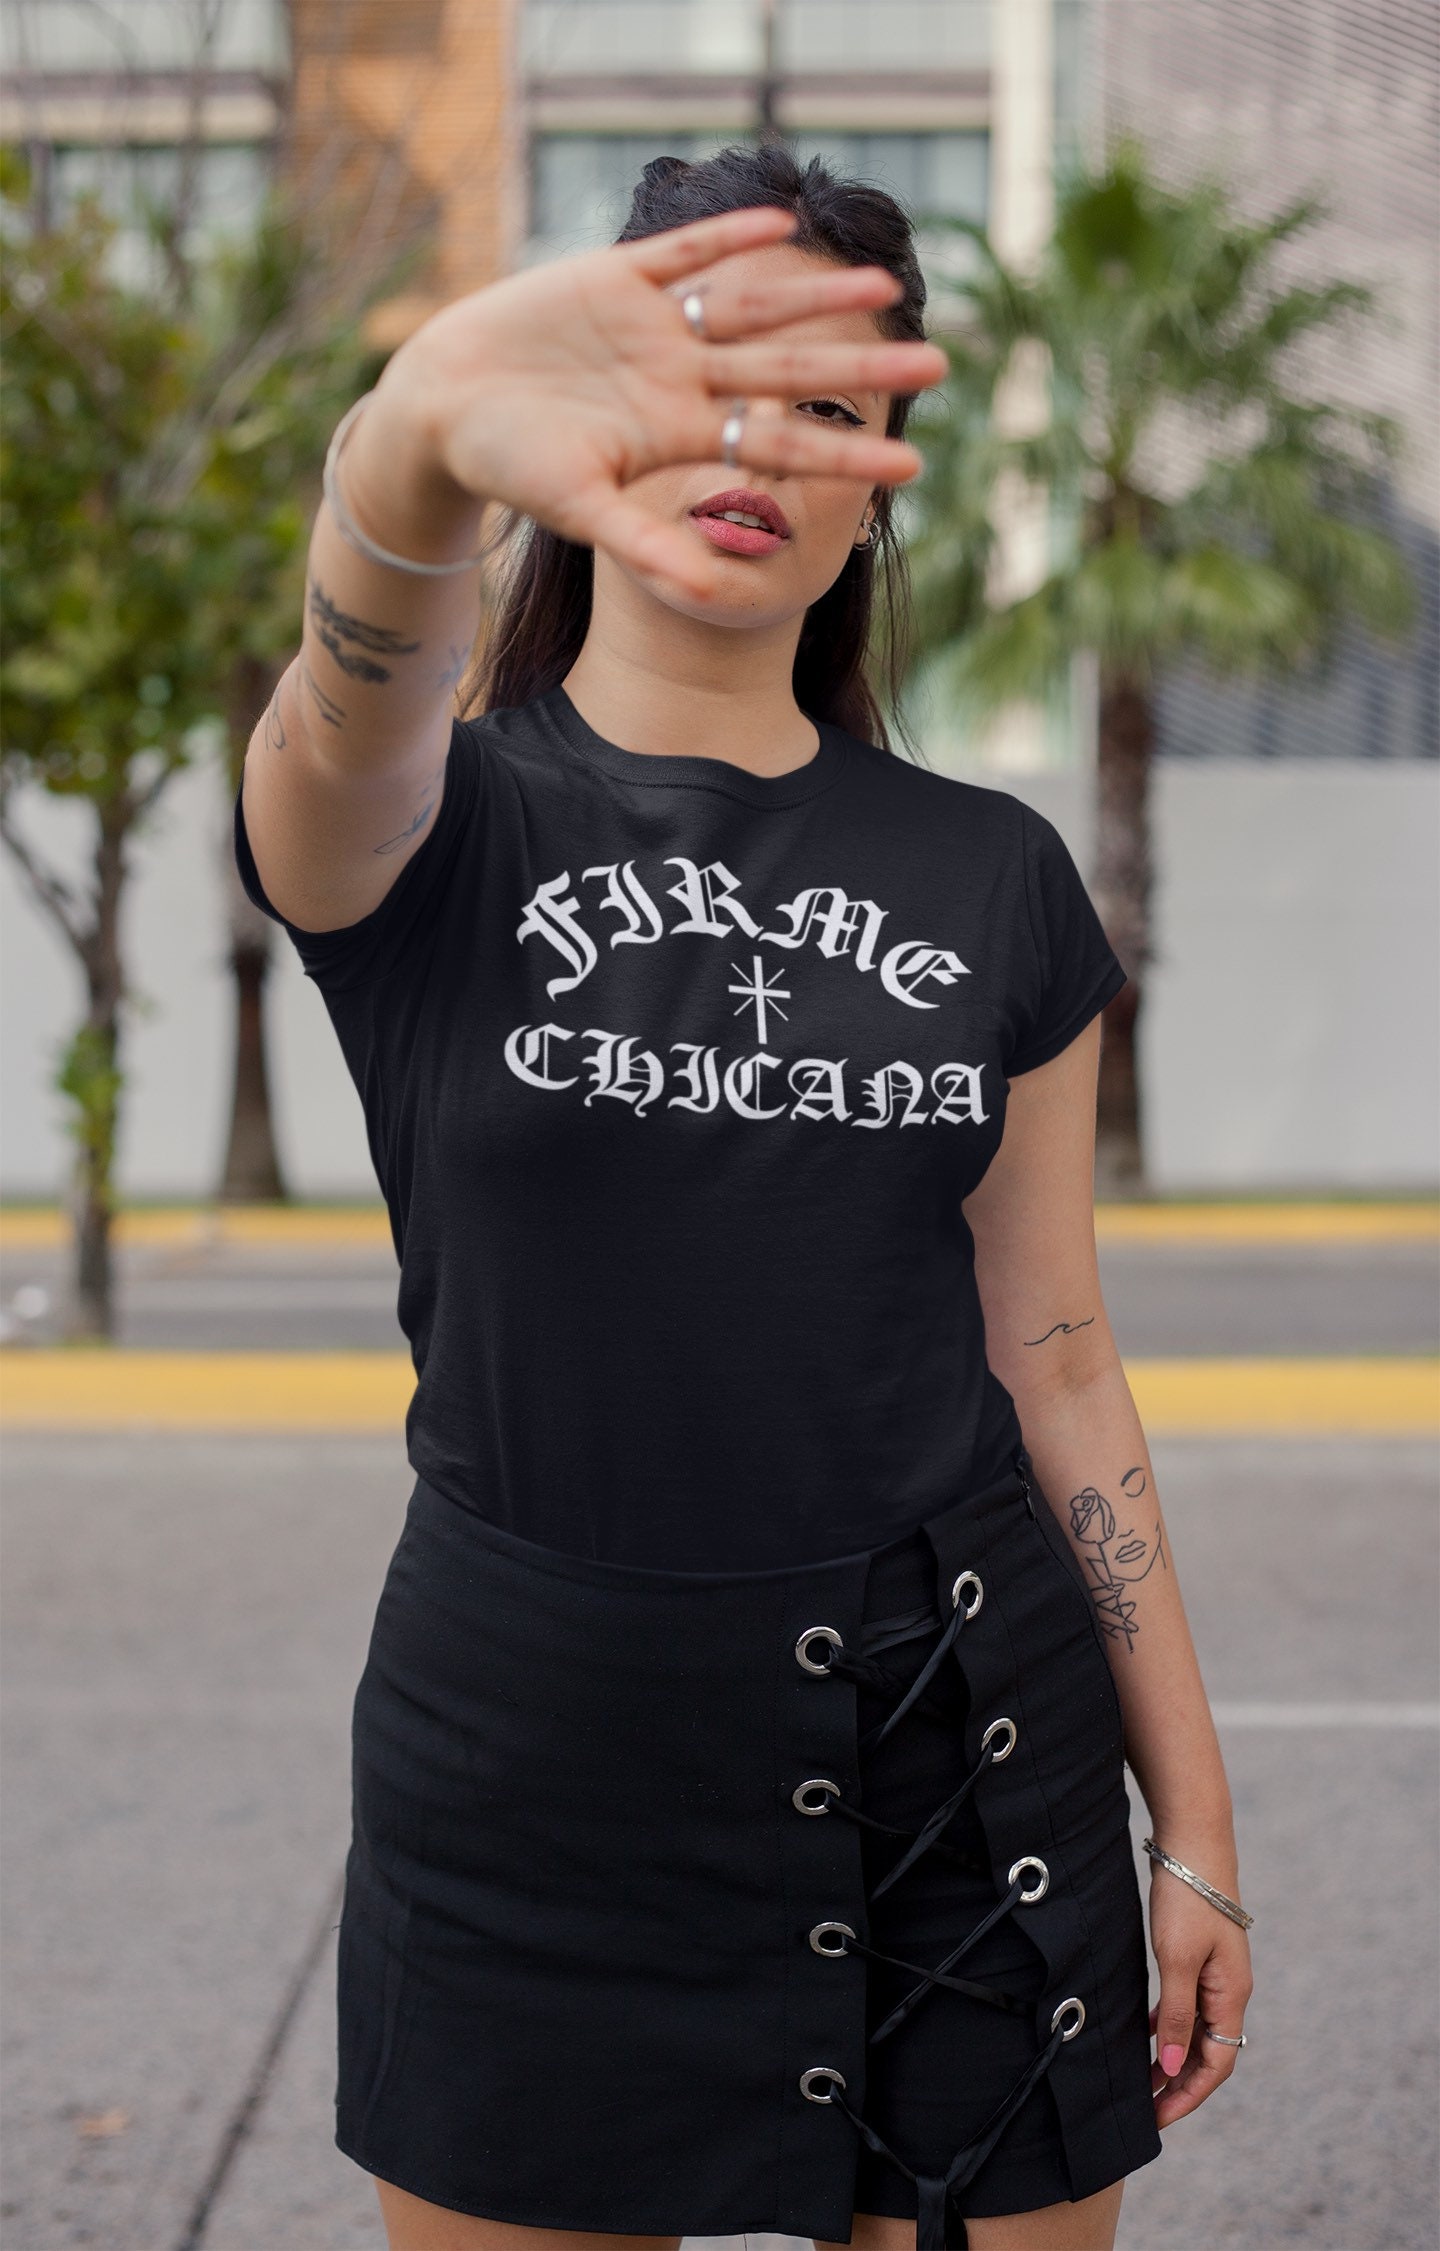 Firme Chicana T-shirt Mexican Chingona Latina Chicana picture photo